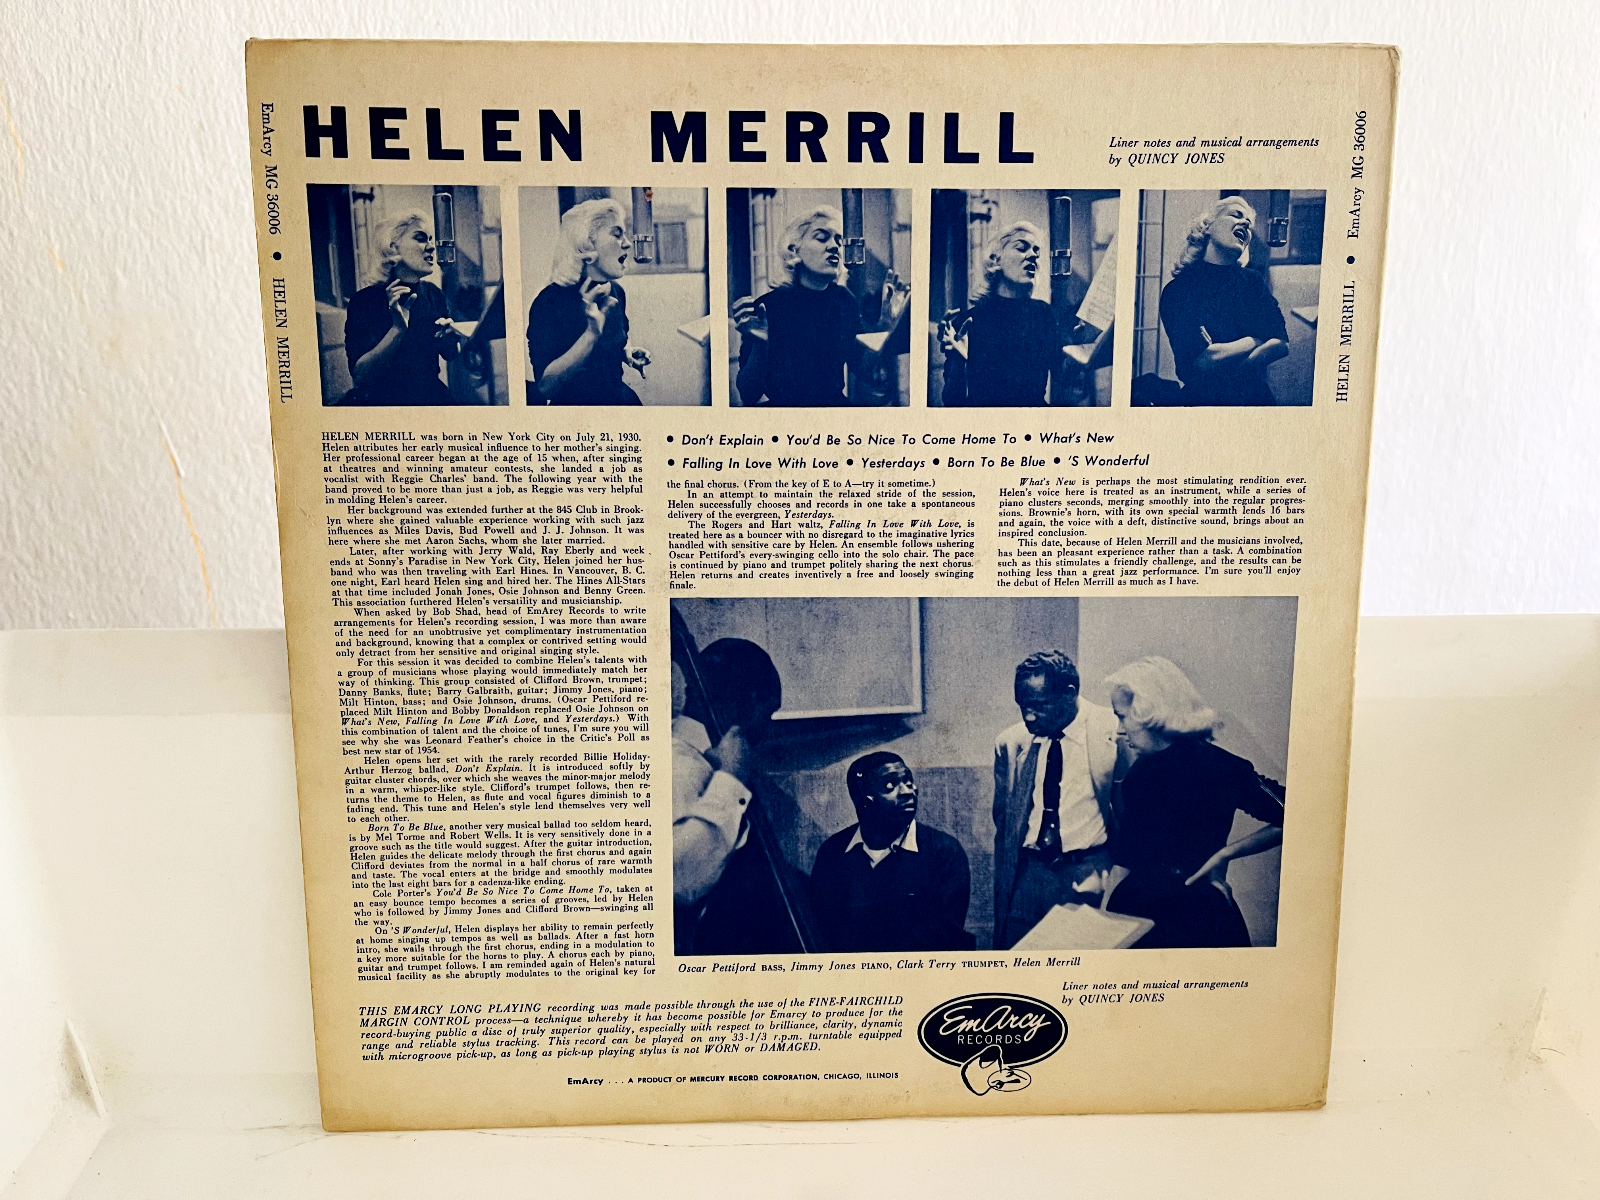 Pic 1 HELEN MERRILL - SAME - EMARCY MG 36006 - MONO - BLUE BACK  COVER - 1954 -  TOP